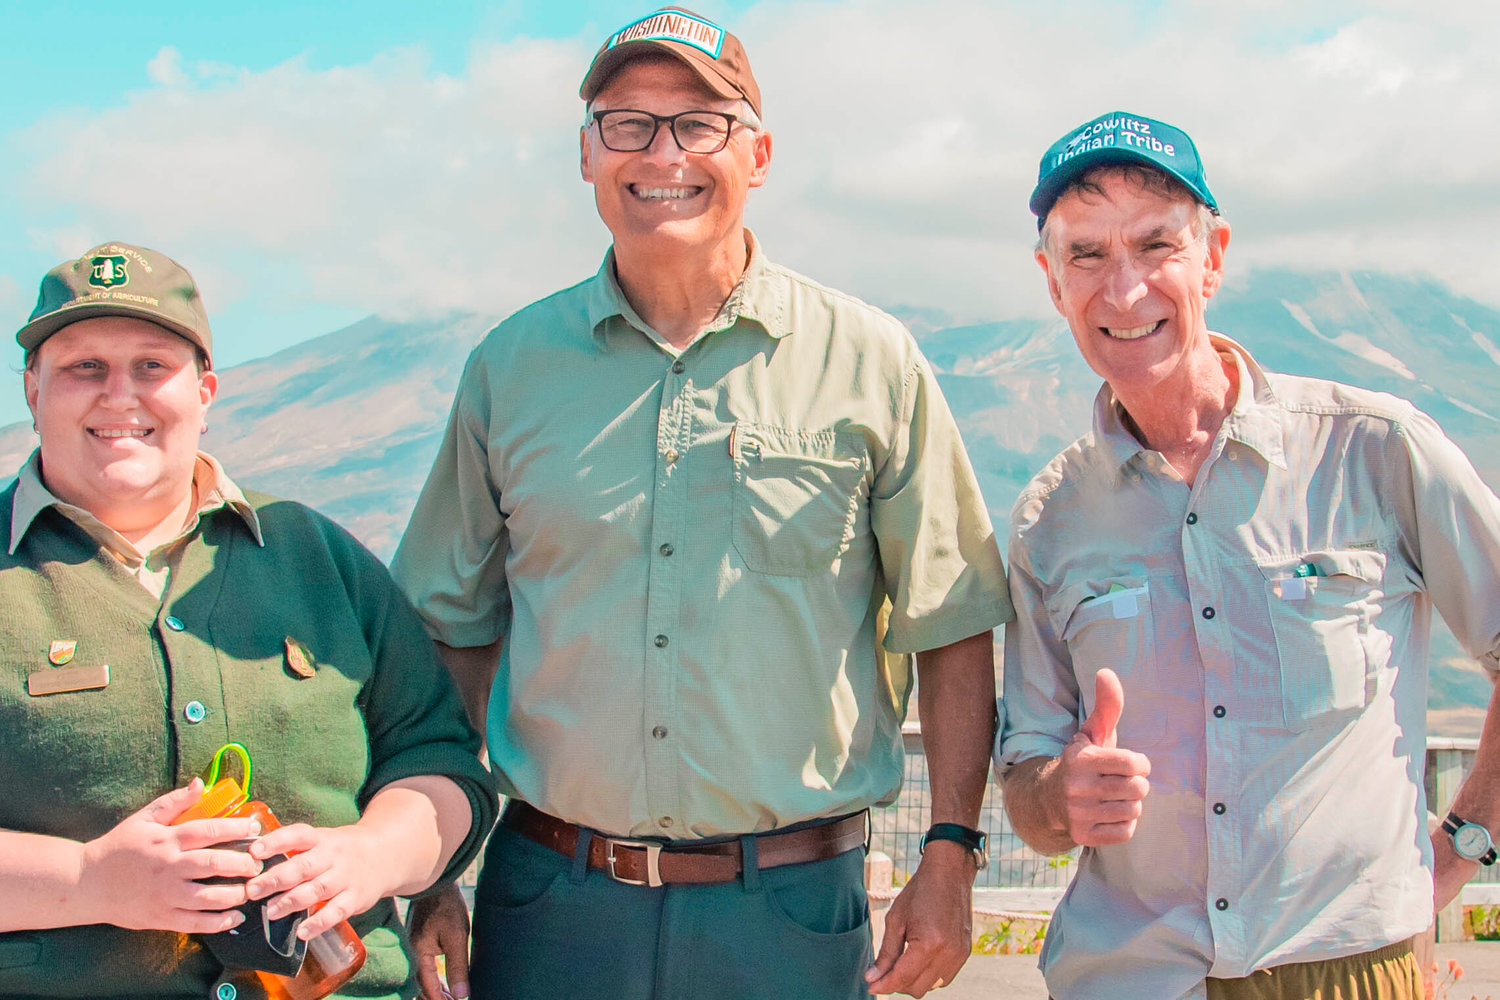 Mount St. Helens sets the backdrop as Katie Akers with the Forest Service, Gov. Jay Inslee, and Bill Nye pose for a photo along a trail Thursday outside the Johnston Ridge Observatoy.